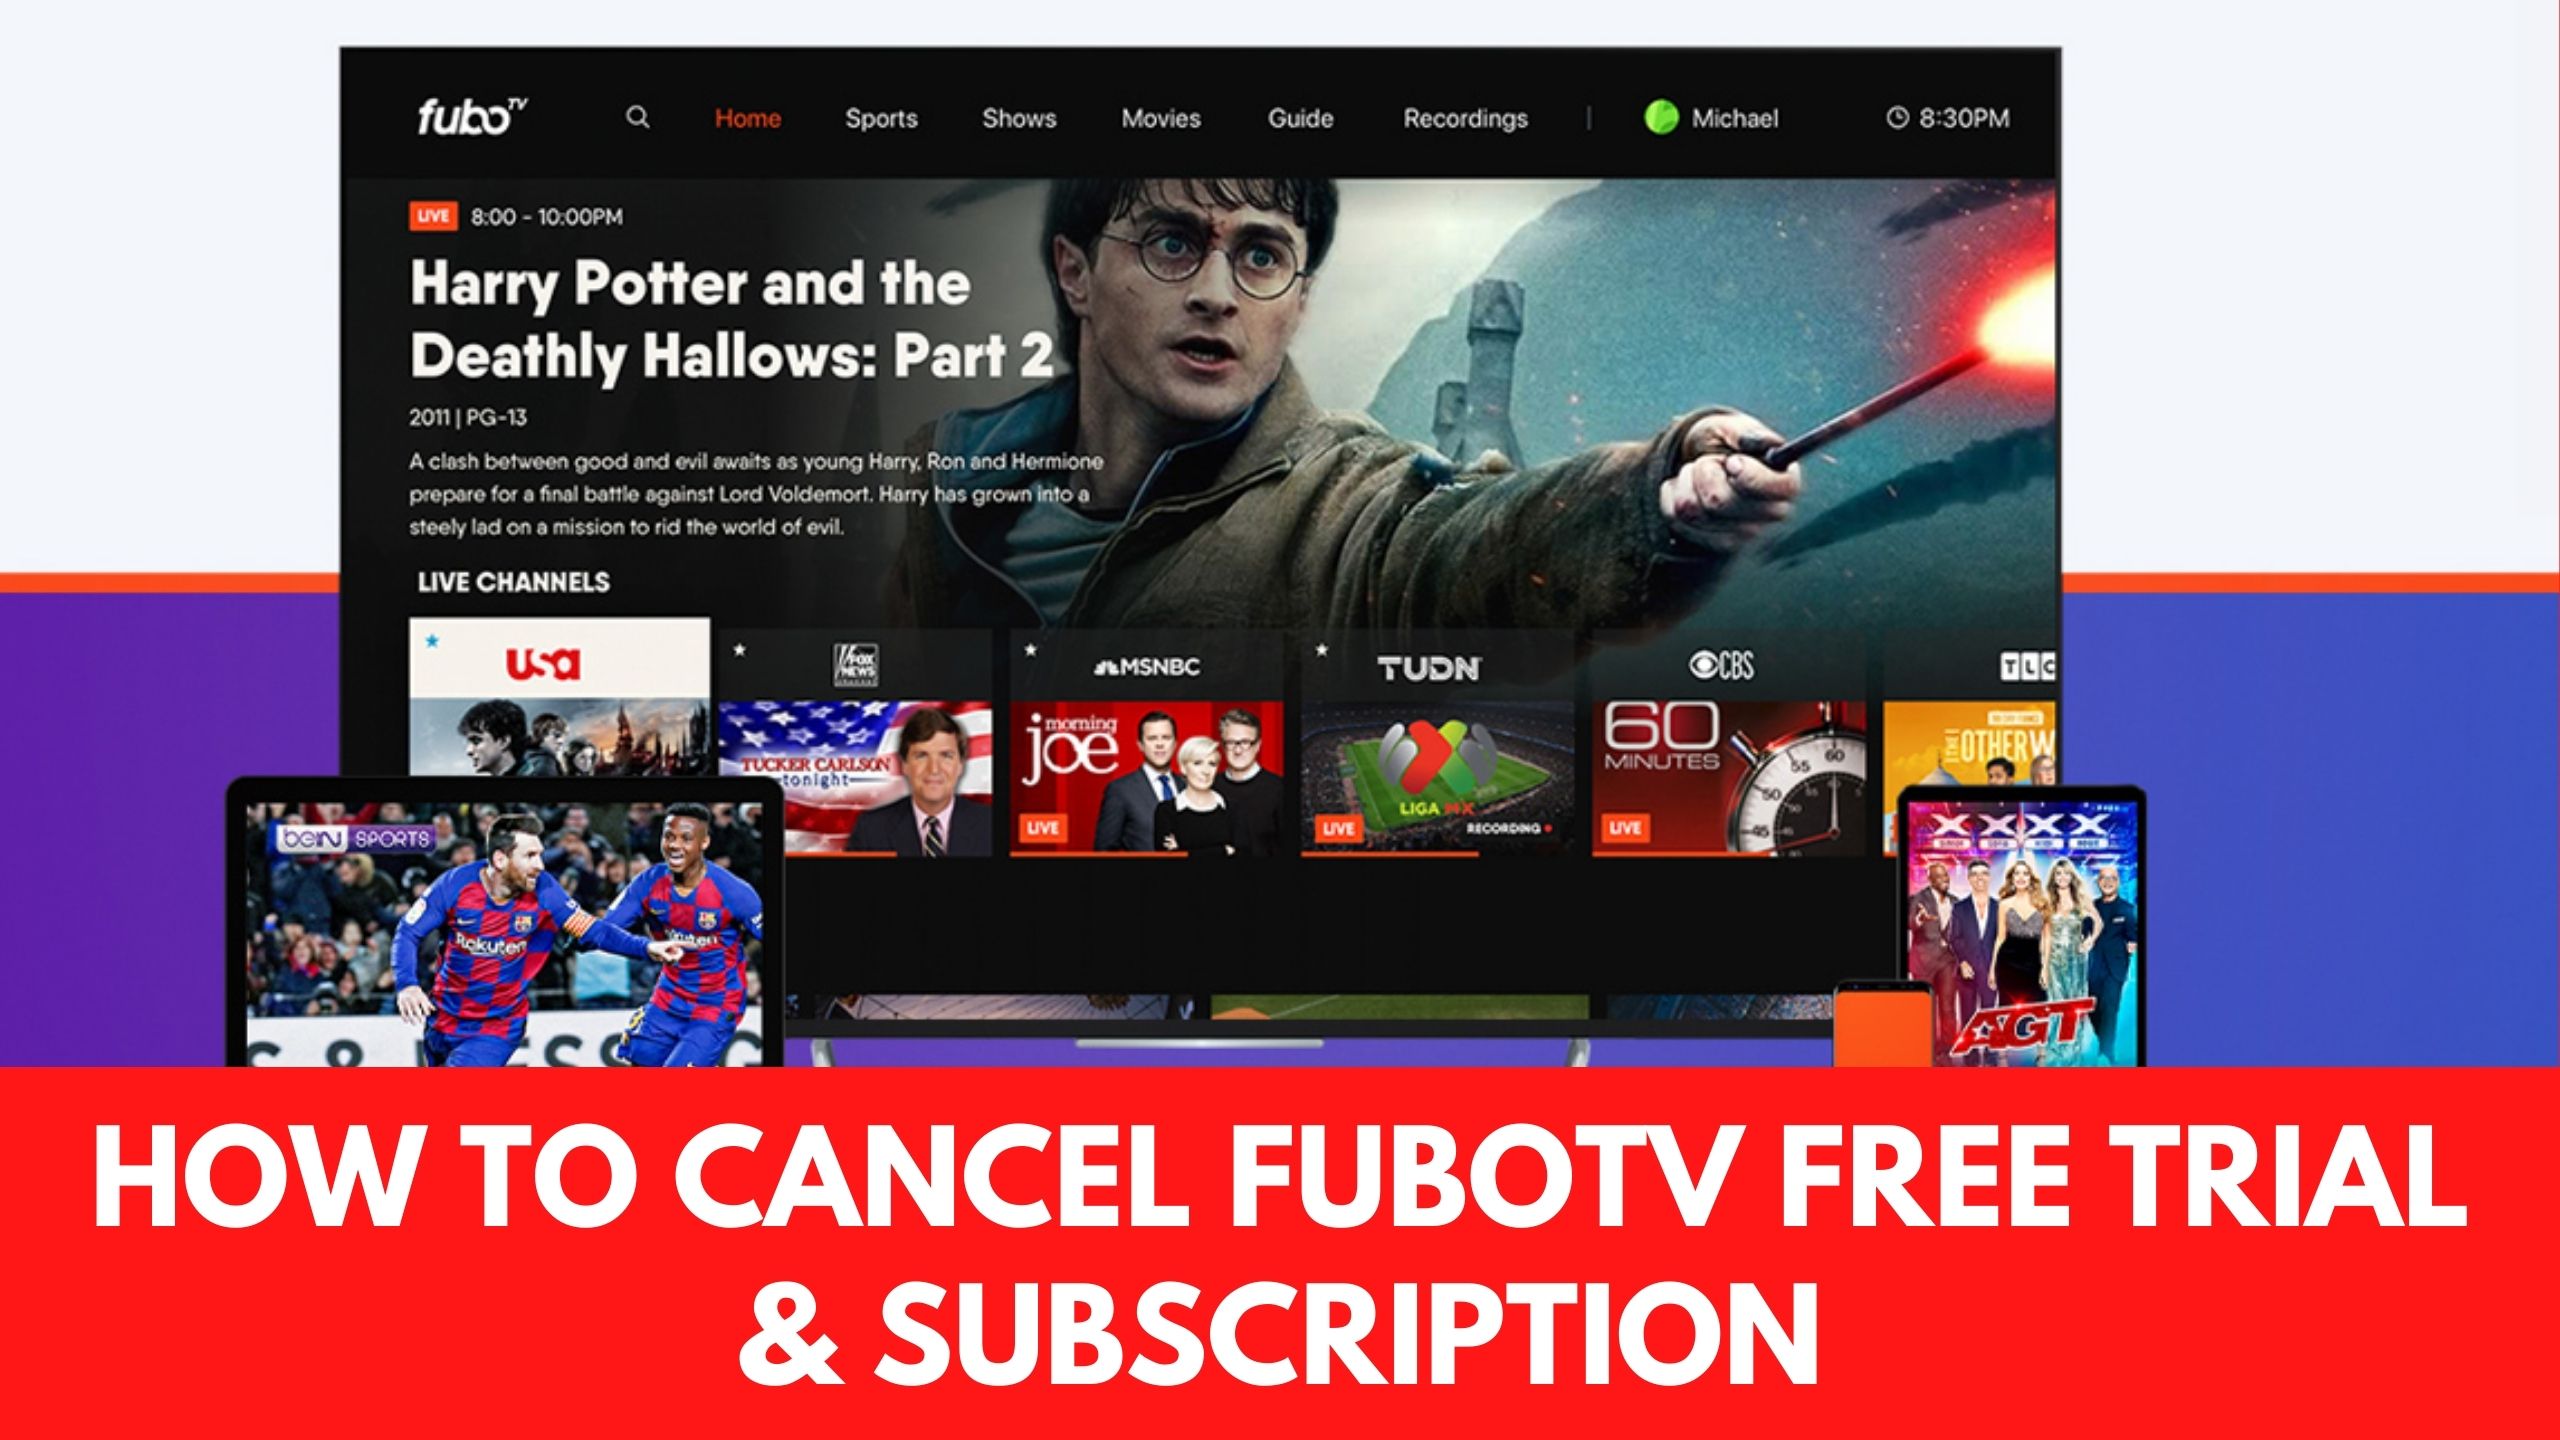 How to Cancel FuboTV Free Trial Subscription [Guide]